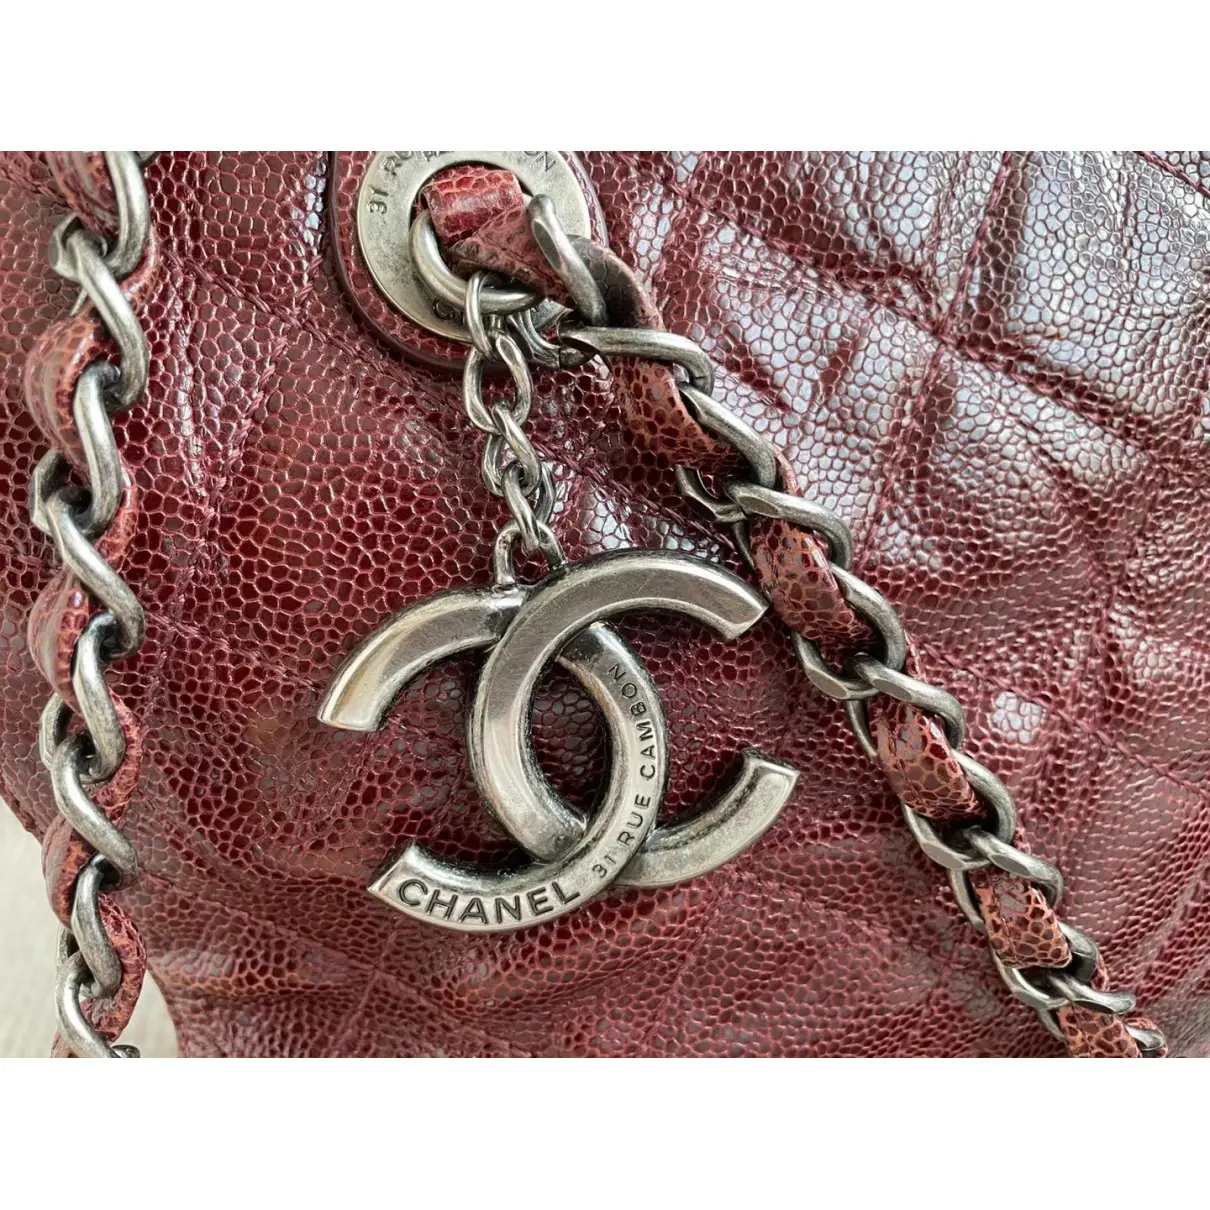 Leather tote Chanel